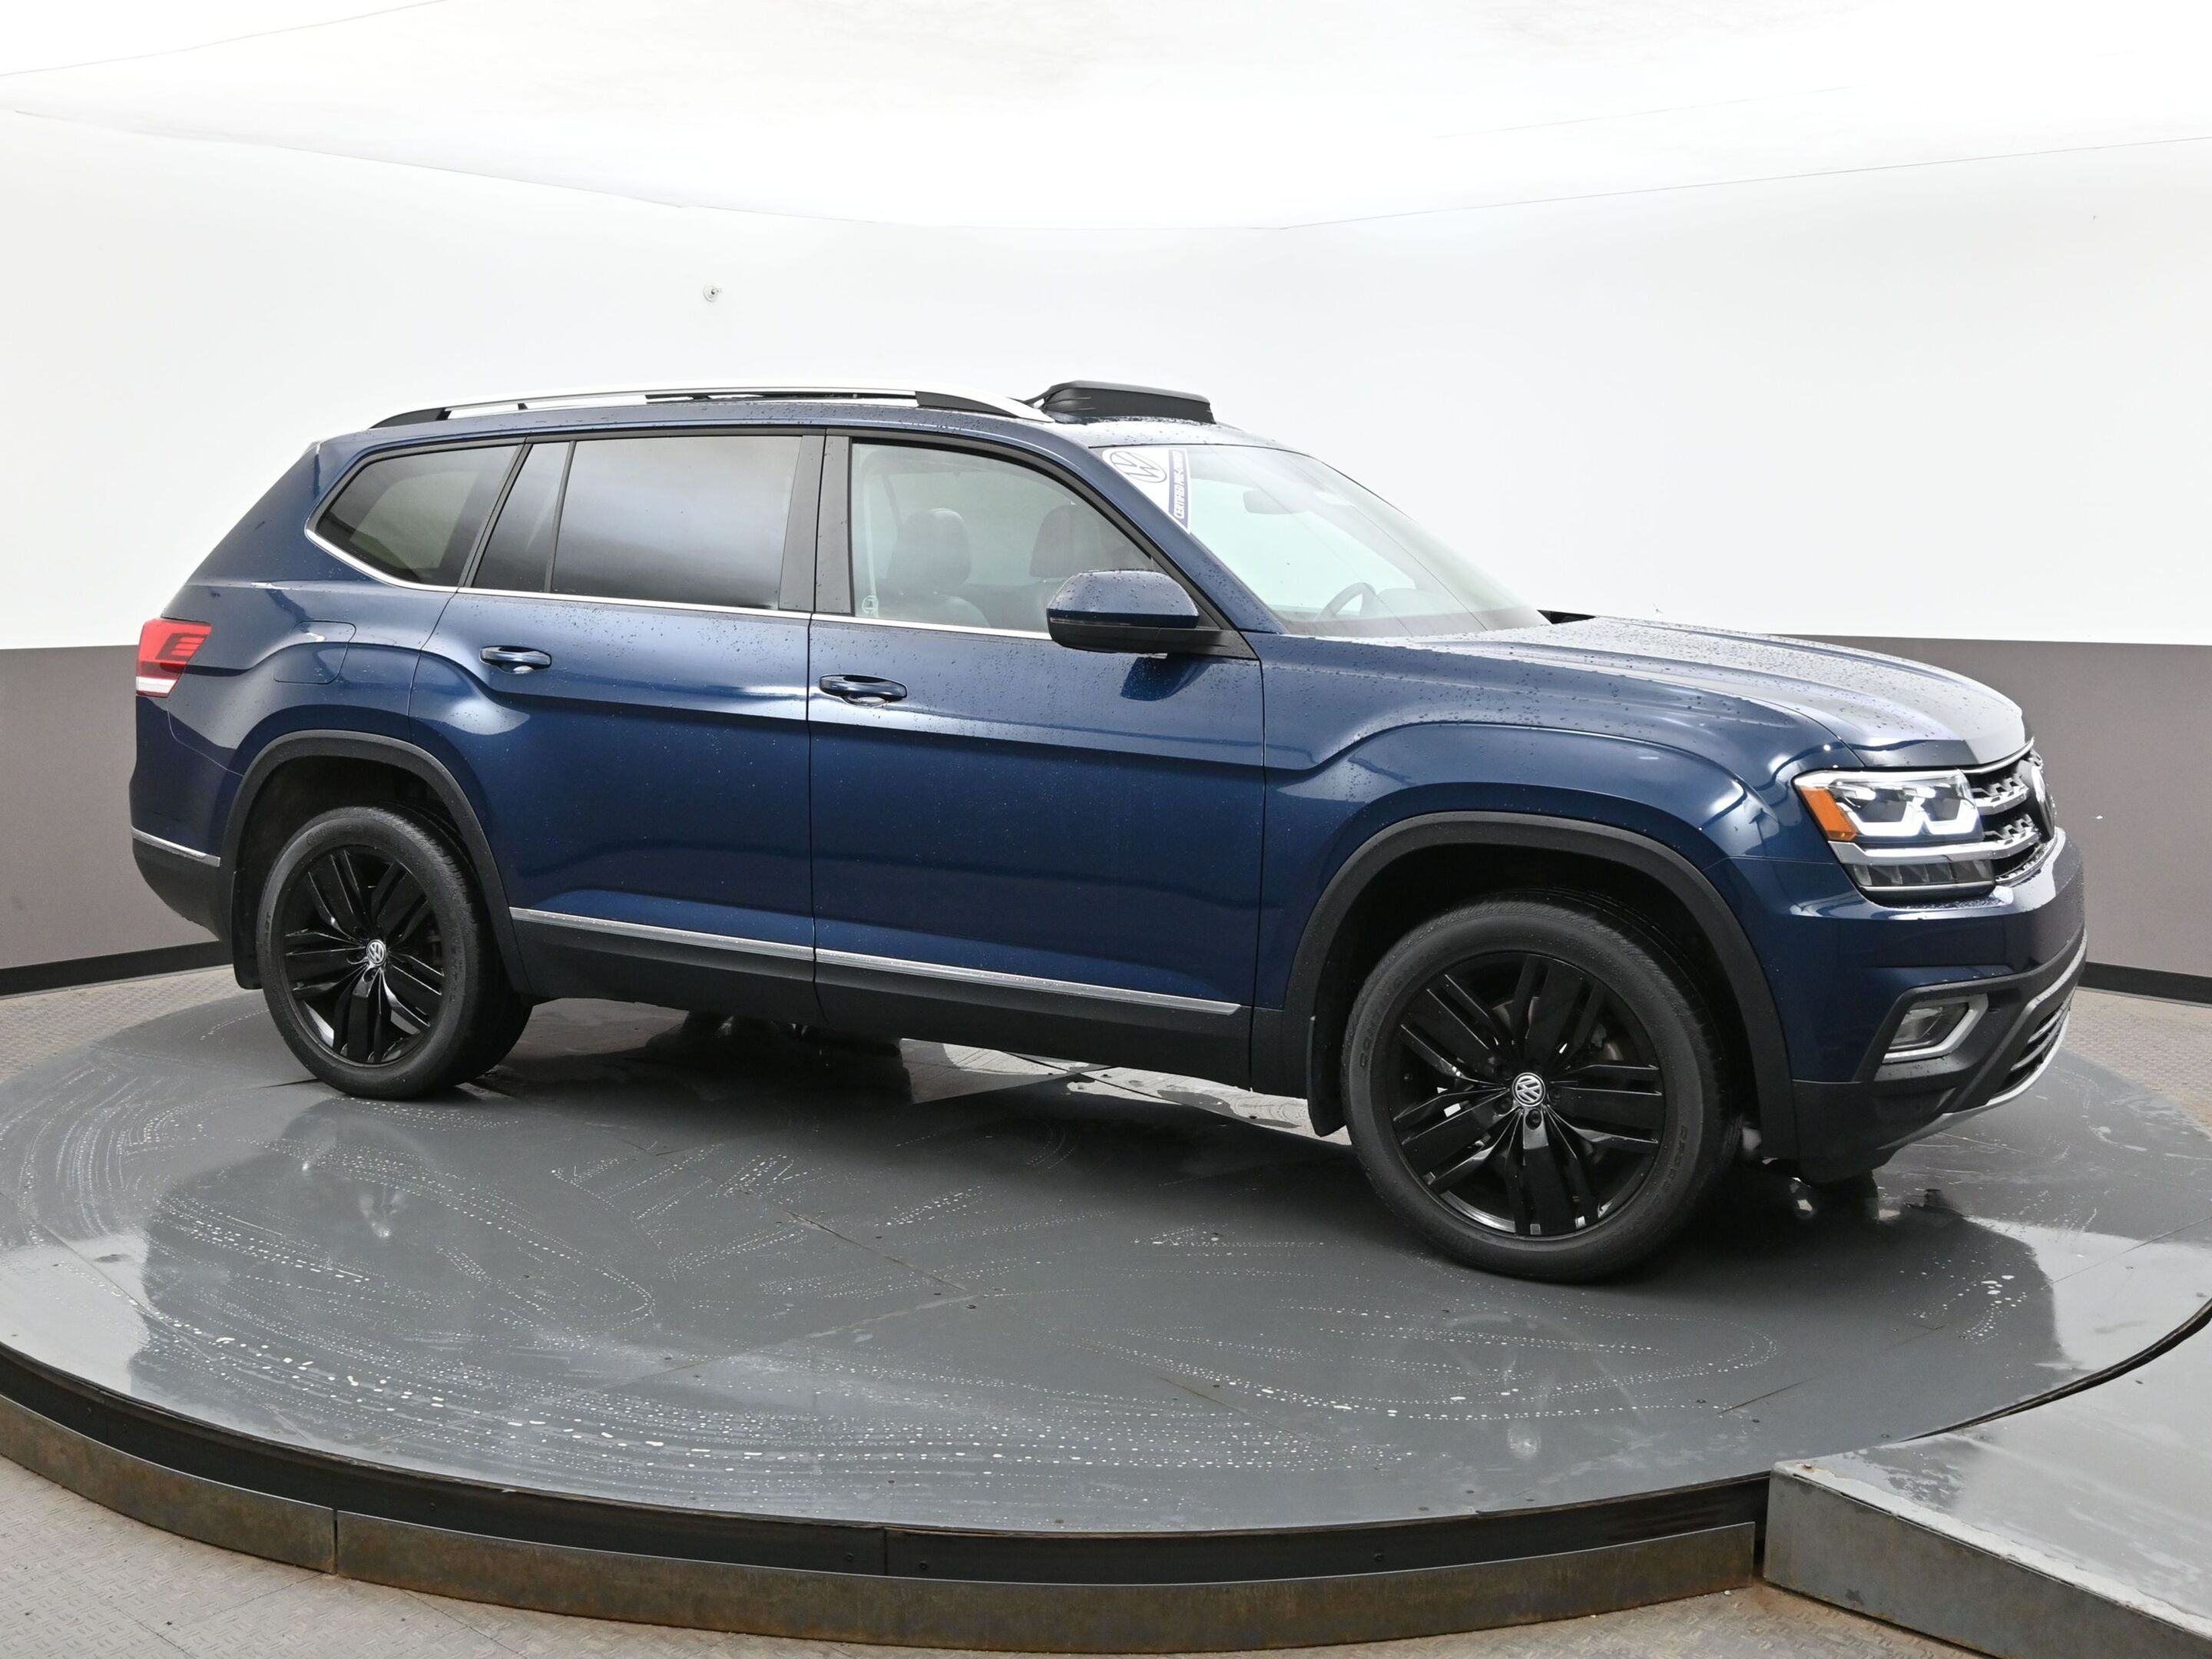 2019 Volkswagen Atlas HIGHLINE 3.6L 4-MOTION 7 seater - AWD with leather